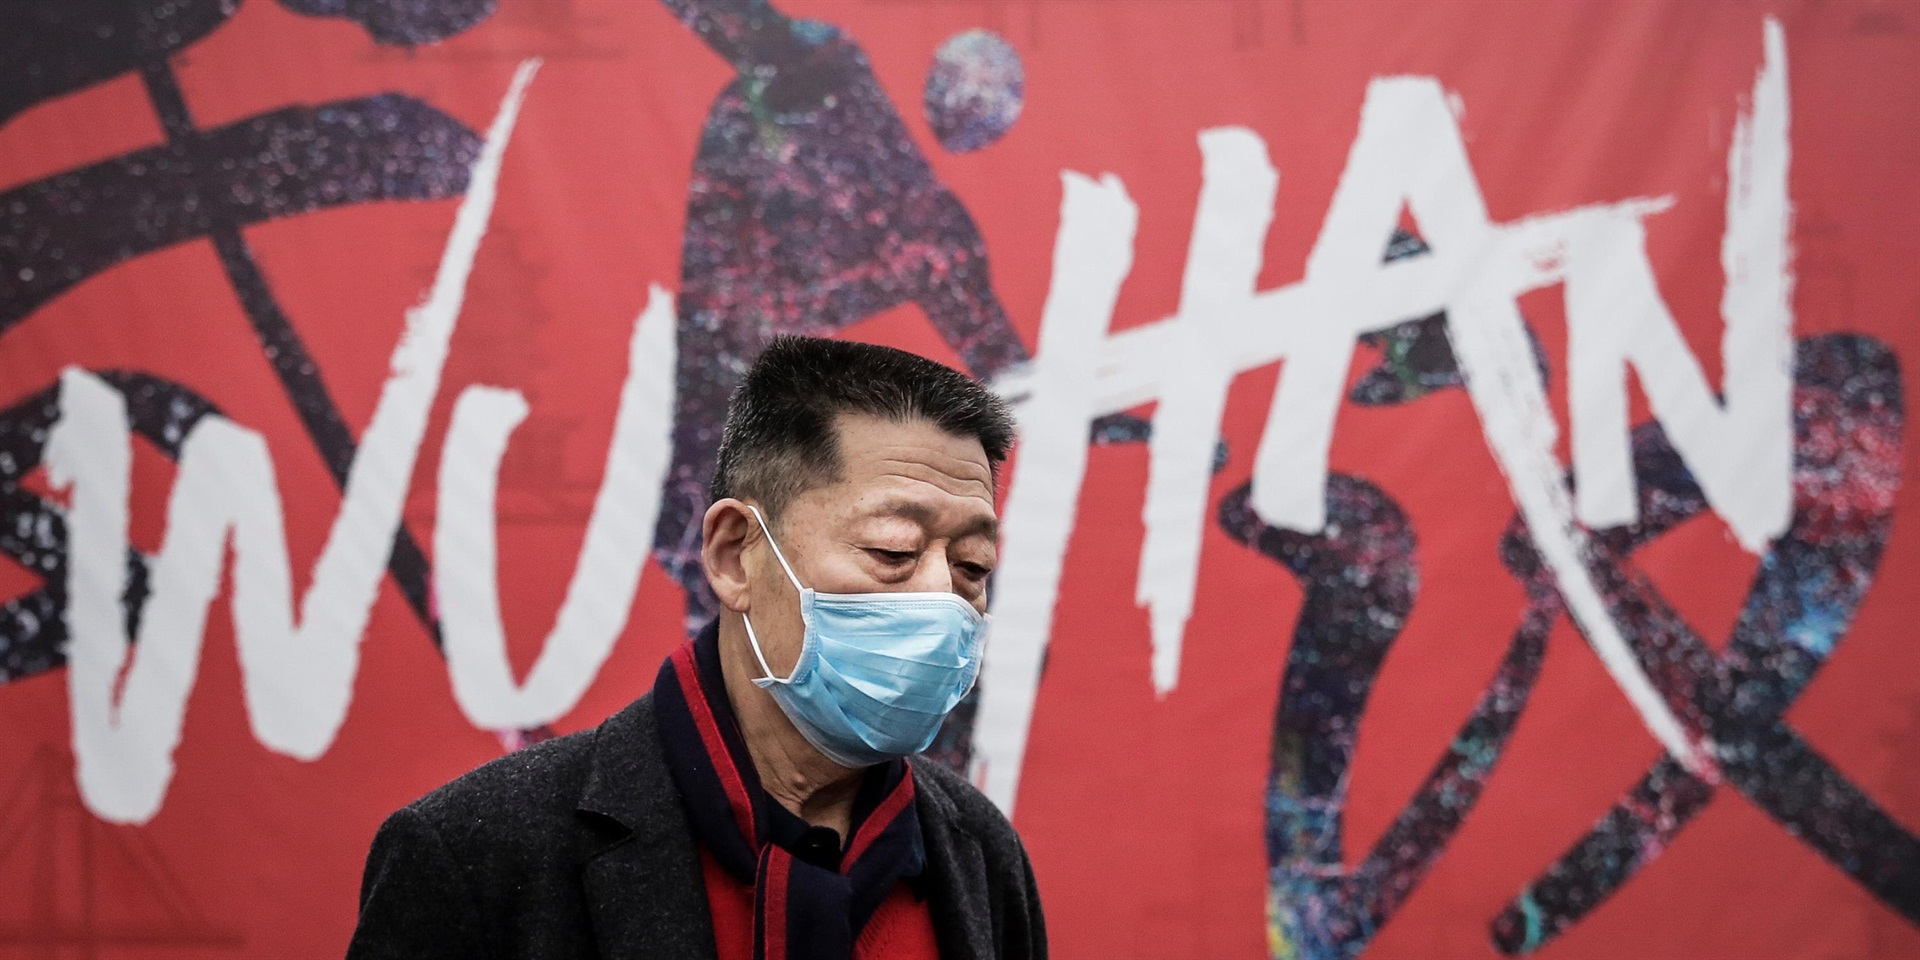 A man wears a mask while walking in the street in Wuhan, Hubei province, China. (Getty Images)